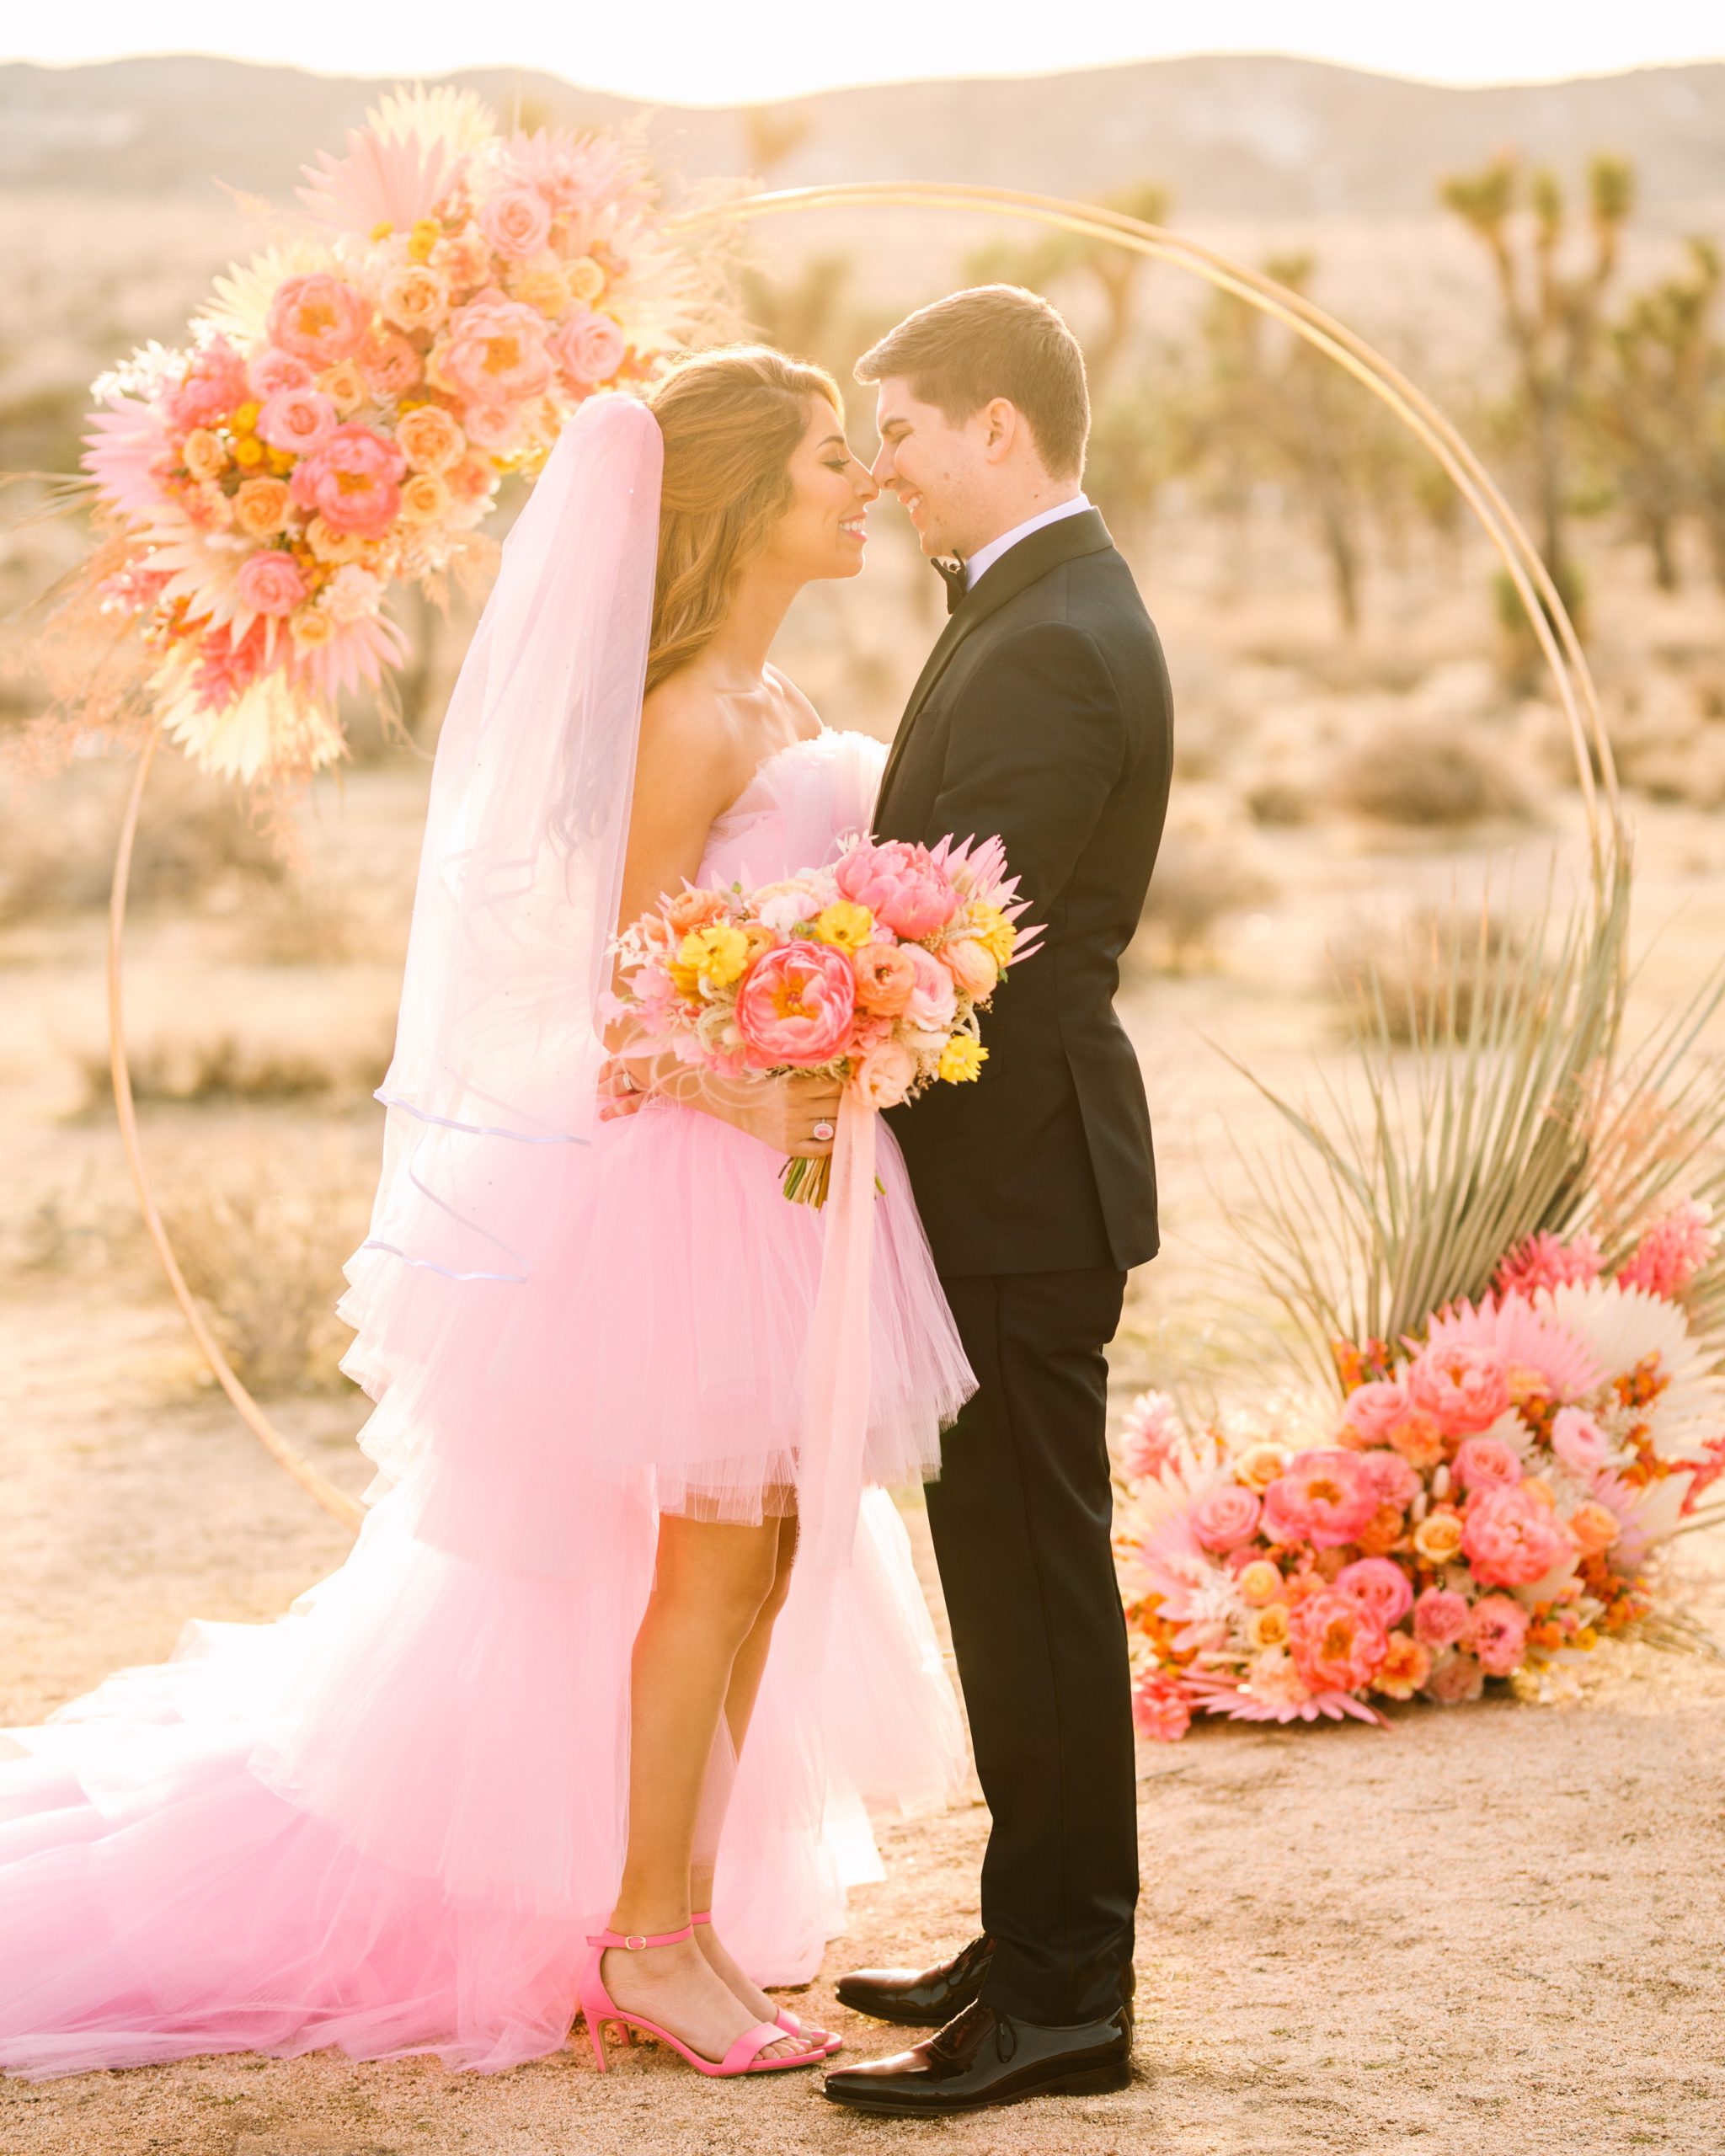 Bride and groom in front of circular ceremony arch | Pink wedding dress Joshua Tree elopement featured on Green Wedding Shoes | Colorful desert wedding inspiration for fun-loving couples in Southern California #joshuatreewedding #joshuatreeelopement #pinkwedding #greenweddingshoes Source: Mary Costa Photography | Los Angeles